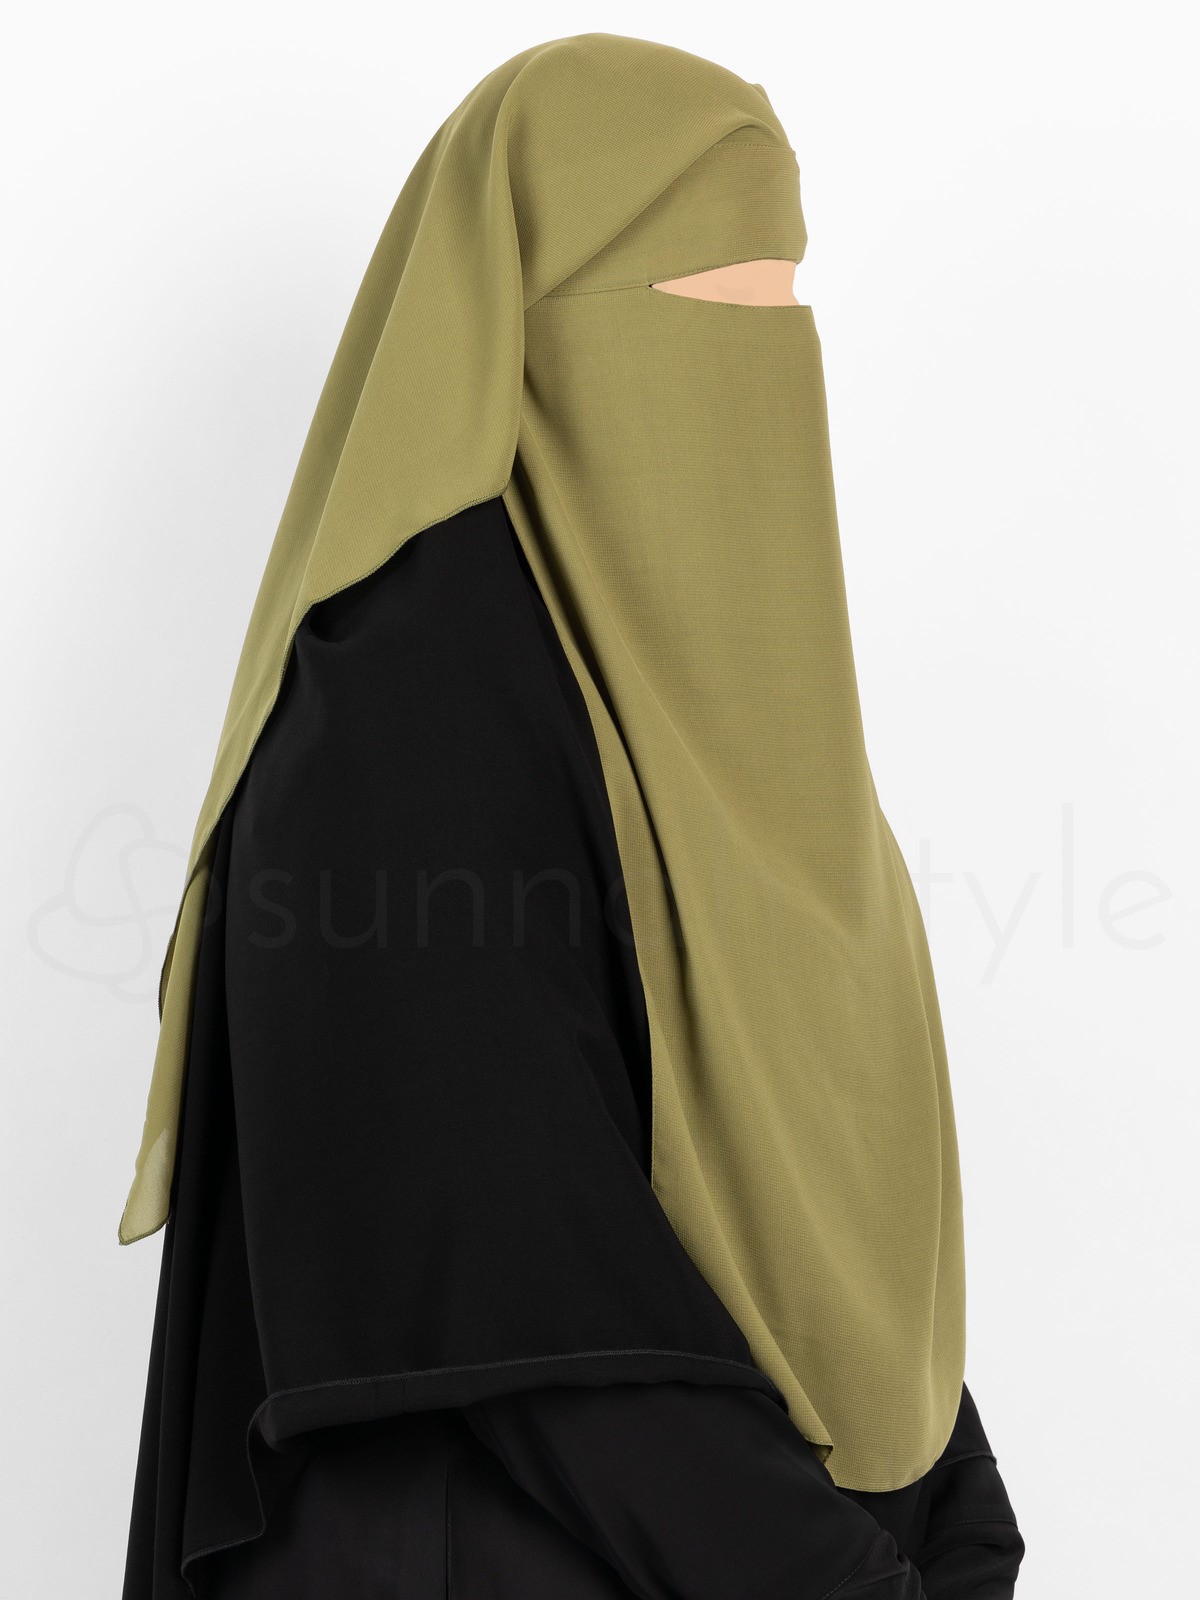 Sunnah Style - Long Two Layer Niqab (Moss)